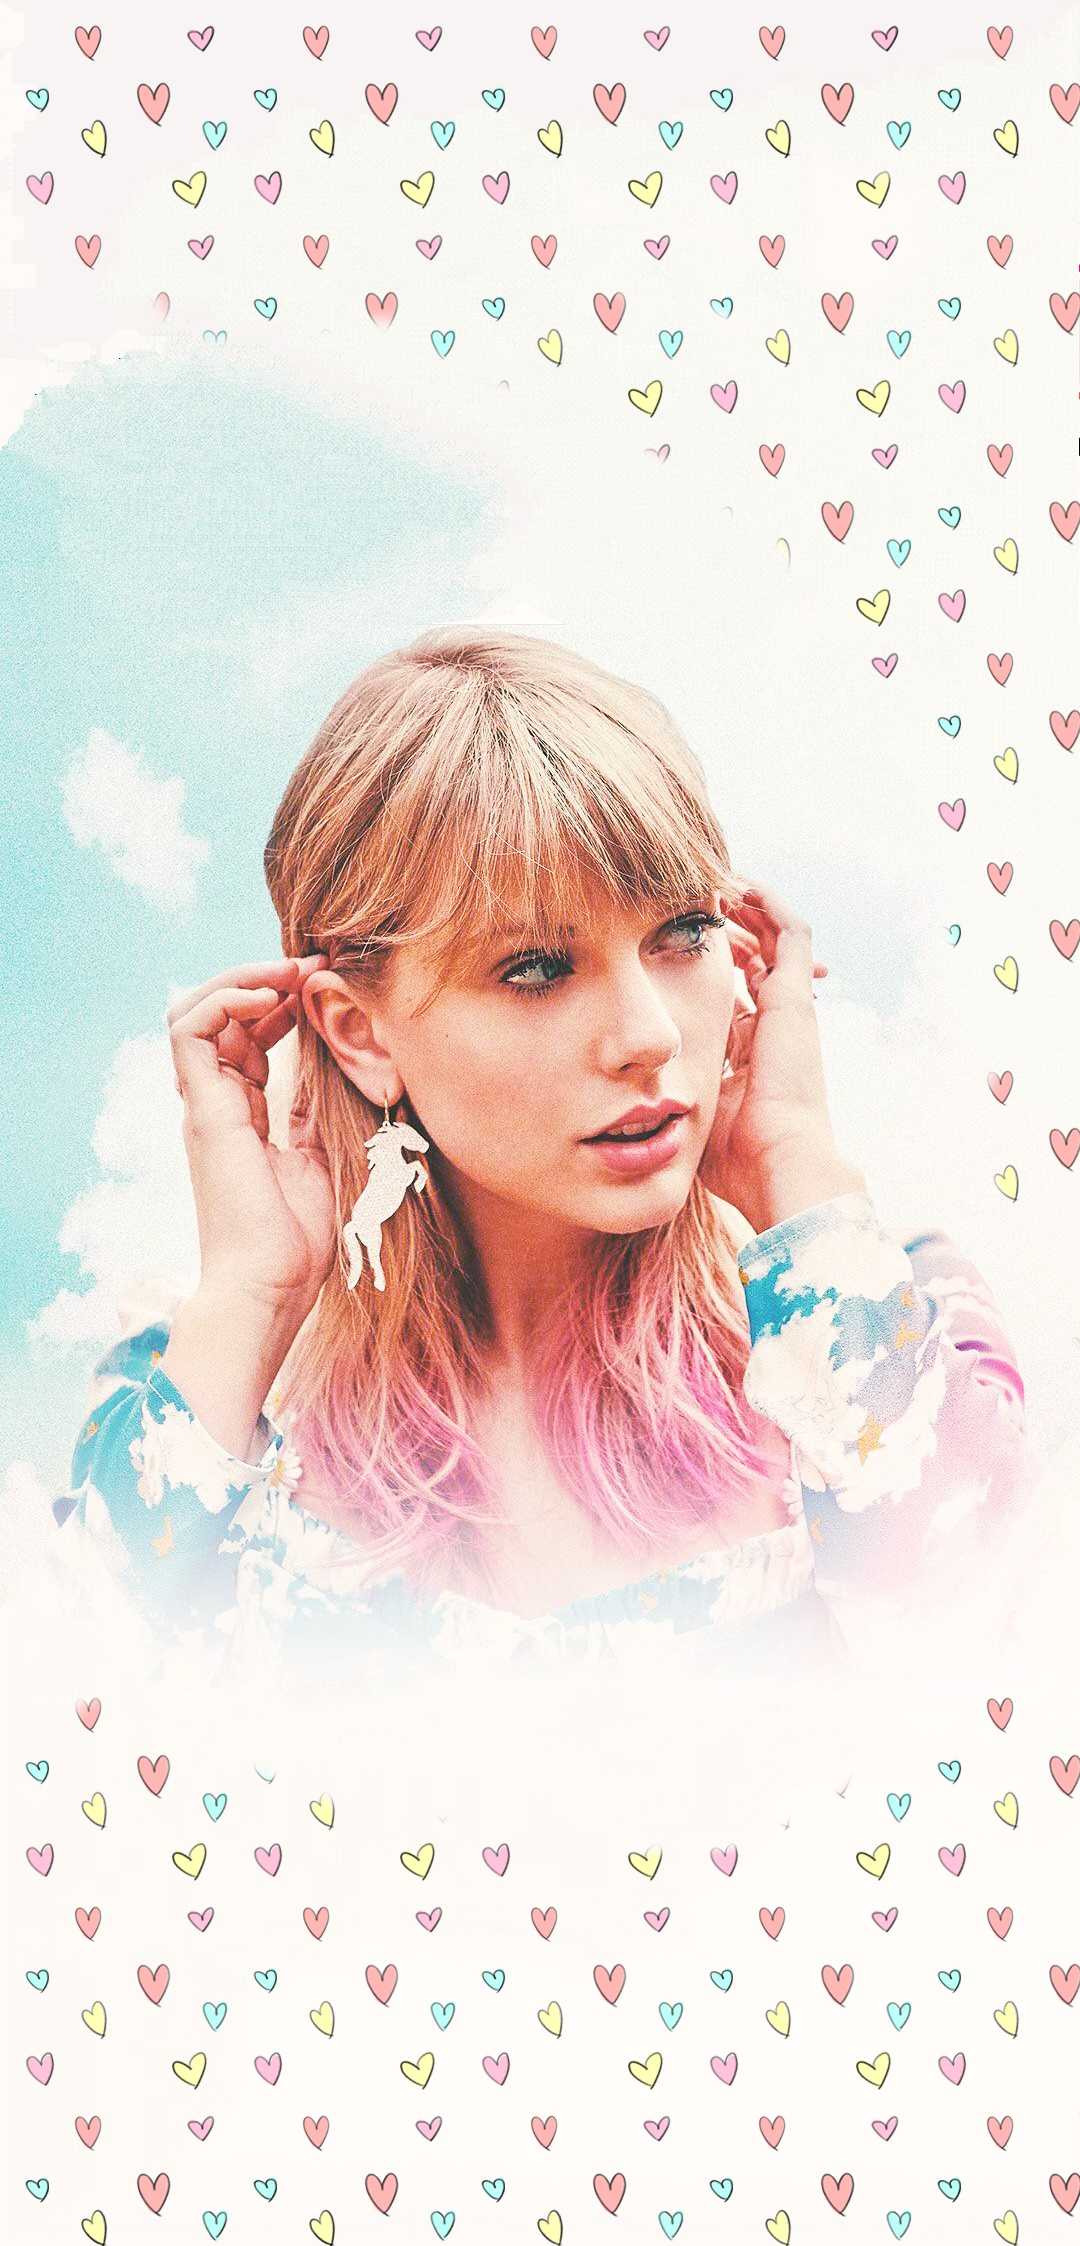 Taylor Swift wallpaper for iPhone with high-resolution 1080x1920 pixel. You can use this wallpaper for your iPhone 5, 6, 7, 8, X, XS, XR backgrounds, Mobile Screensaver, or iPad Lock Screen - Taylor Swift